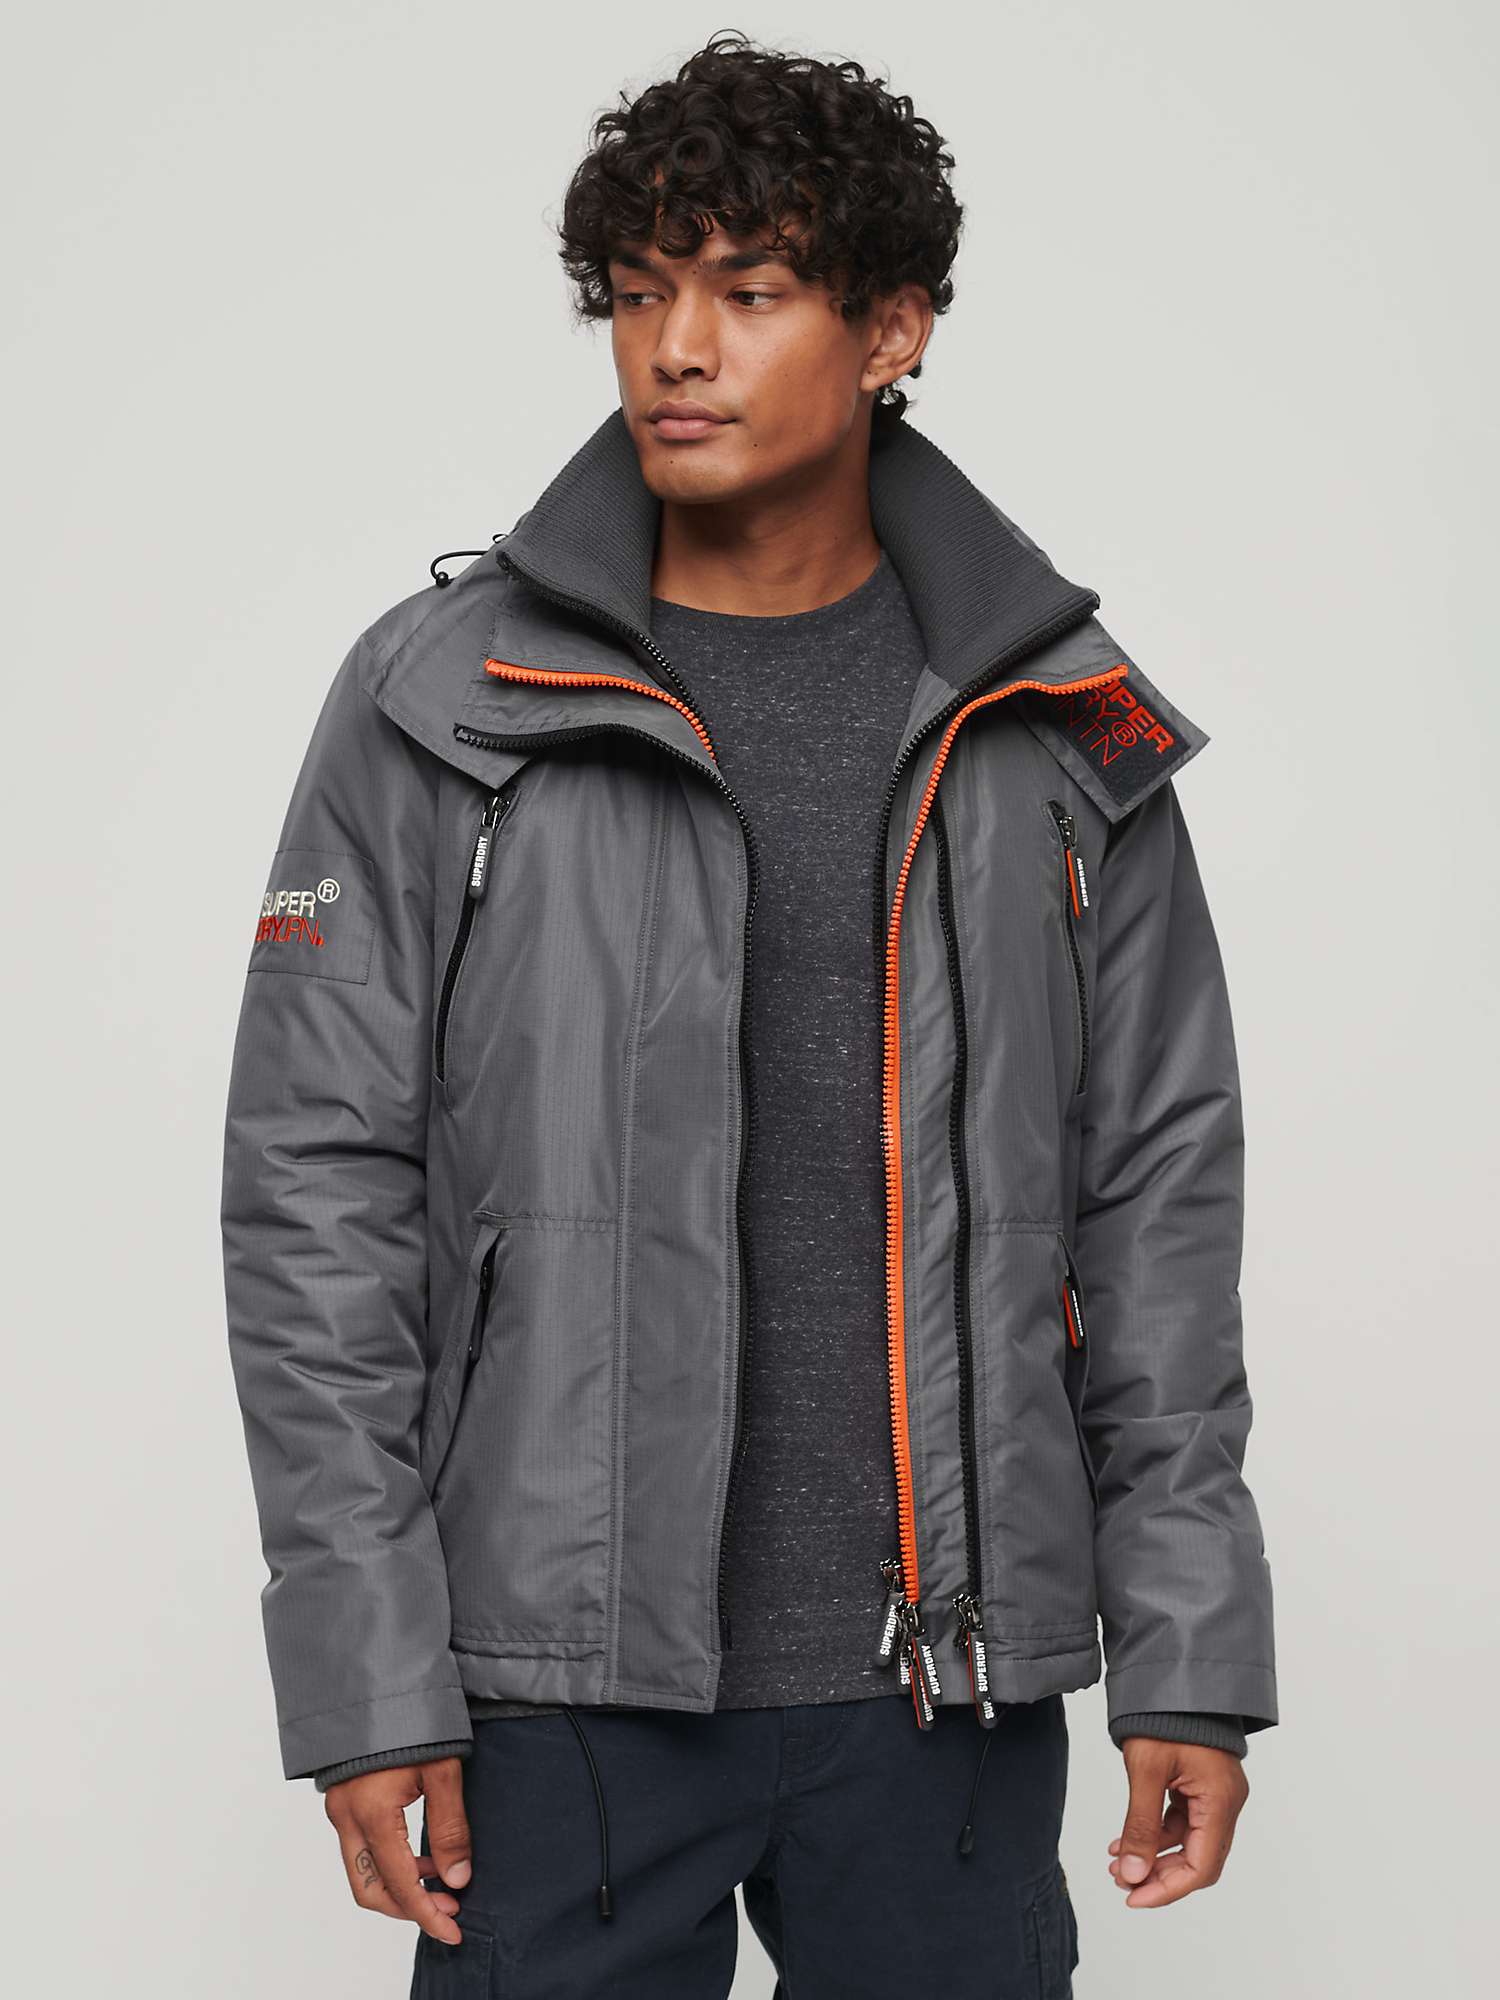 Buy Superdry Mountain SD Windcheater Jacket Online at johnlewis.com